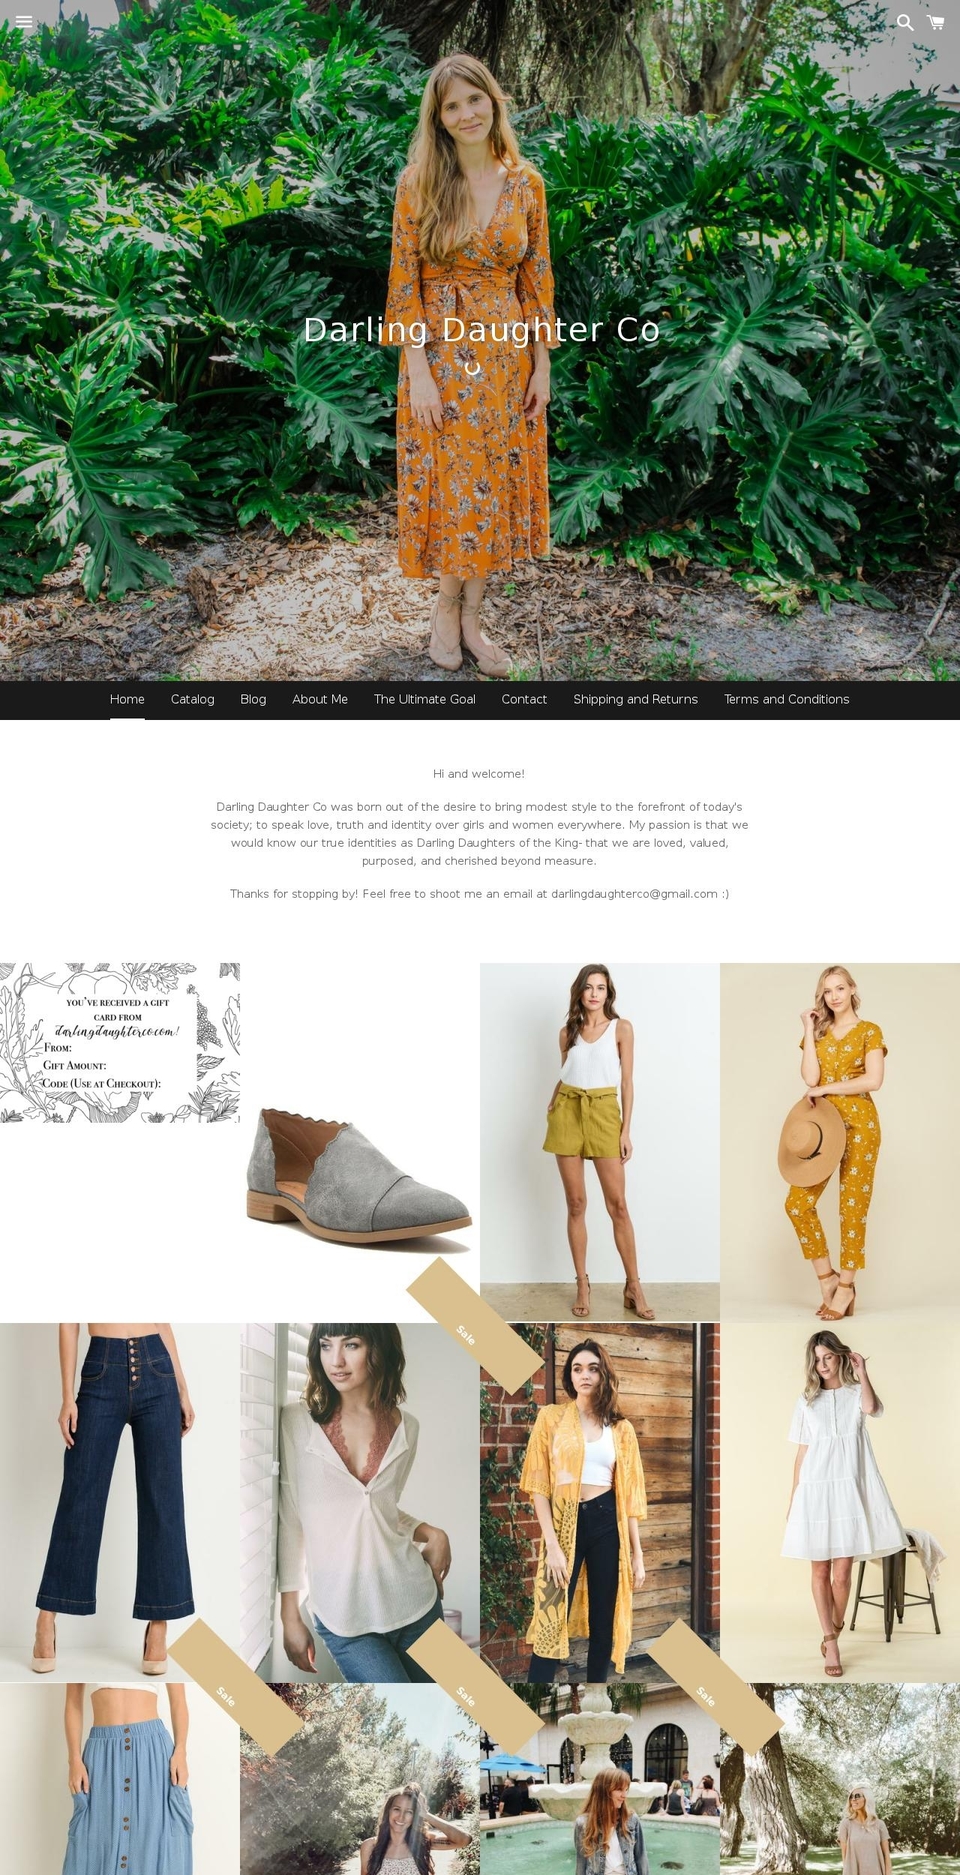 Narrative with Installments message Shopify theme site example darlingdaughterco.com